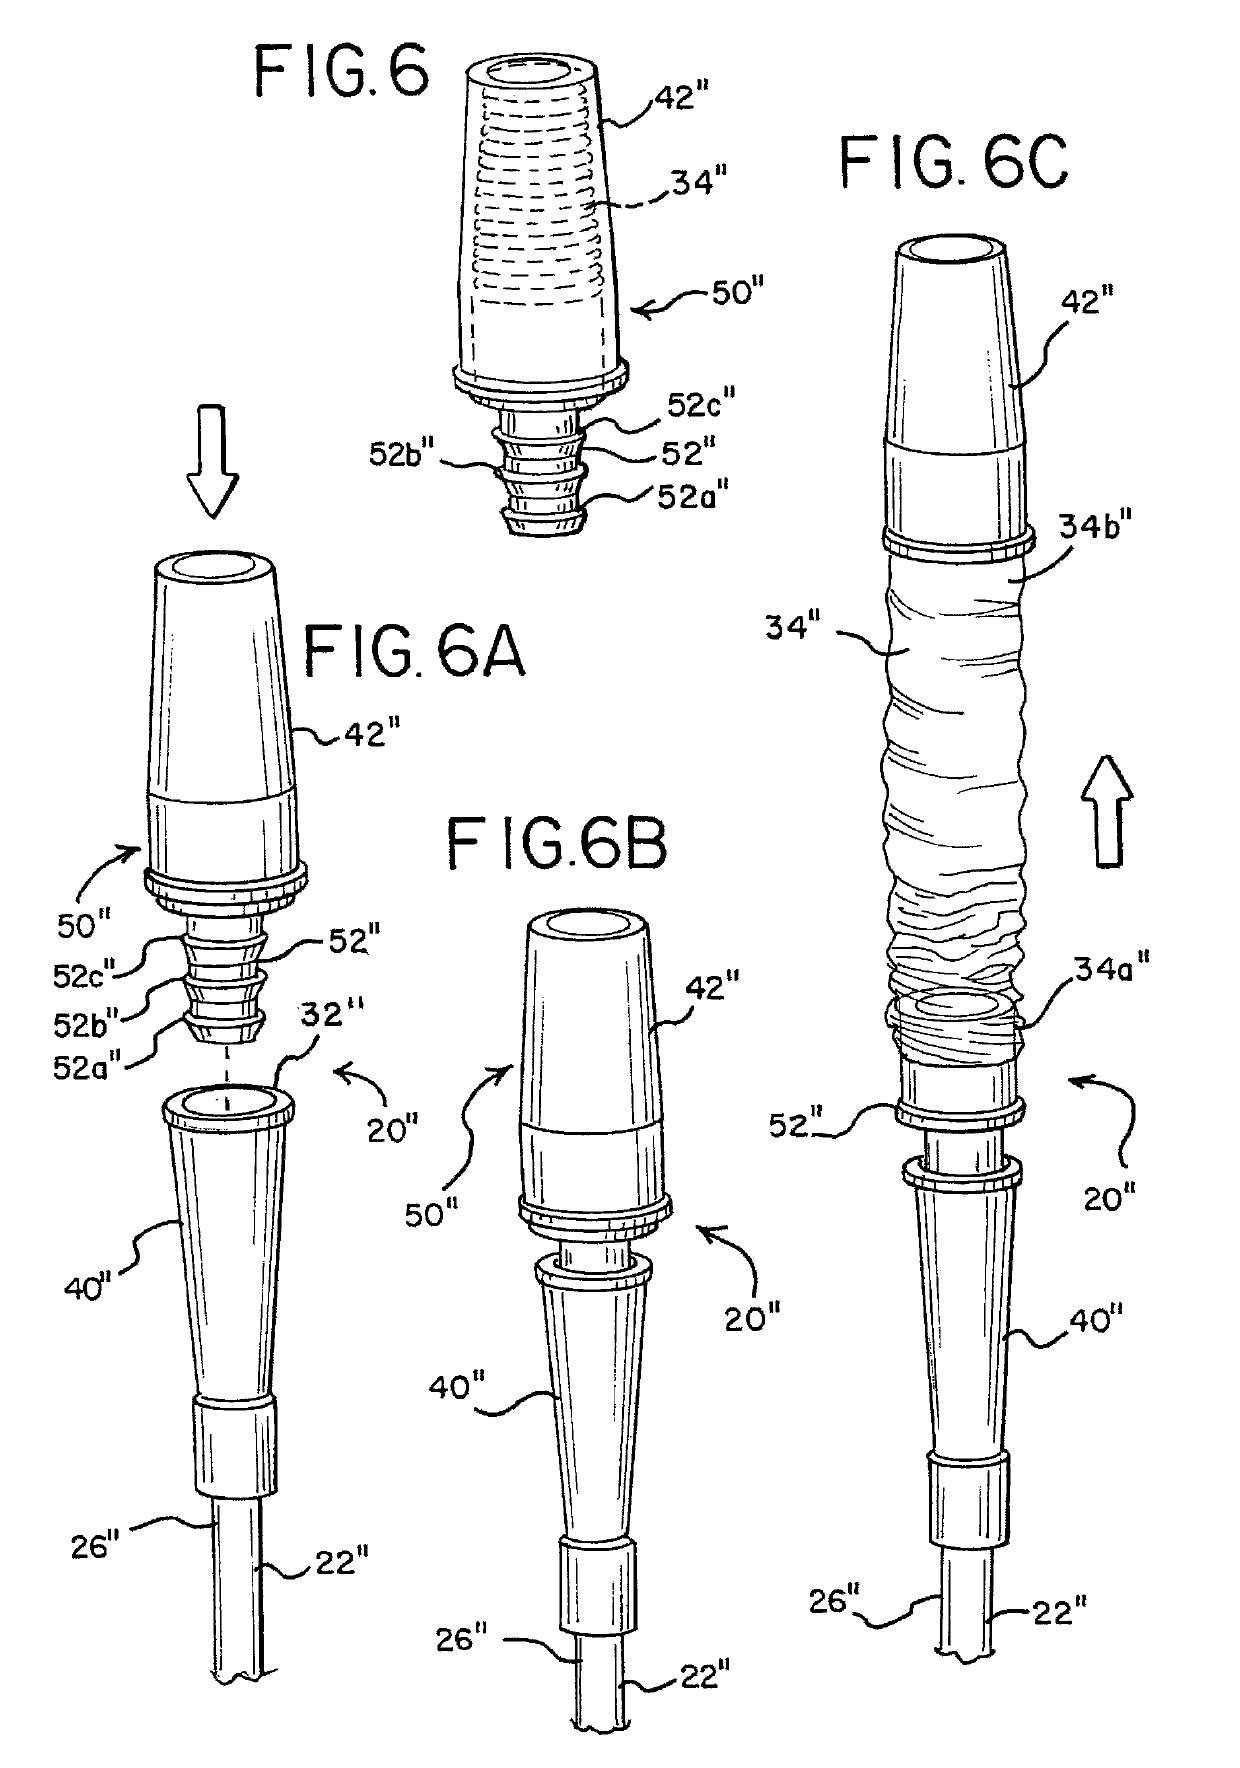 Intermittent urinary catheter assembly and an adapter assembly for an intermittent urinary catheter